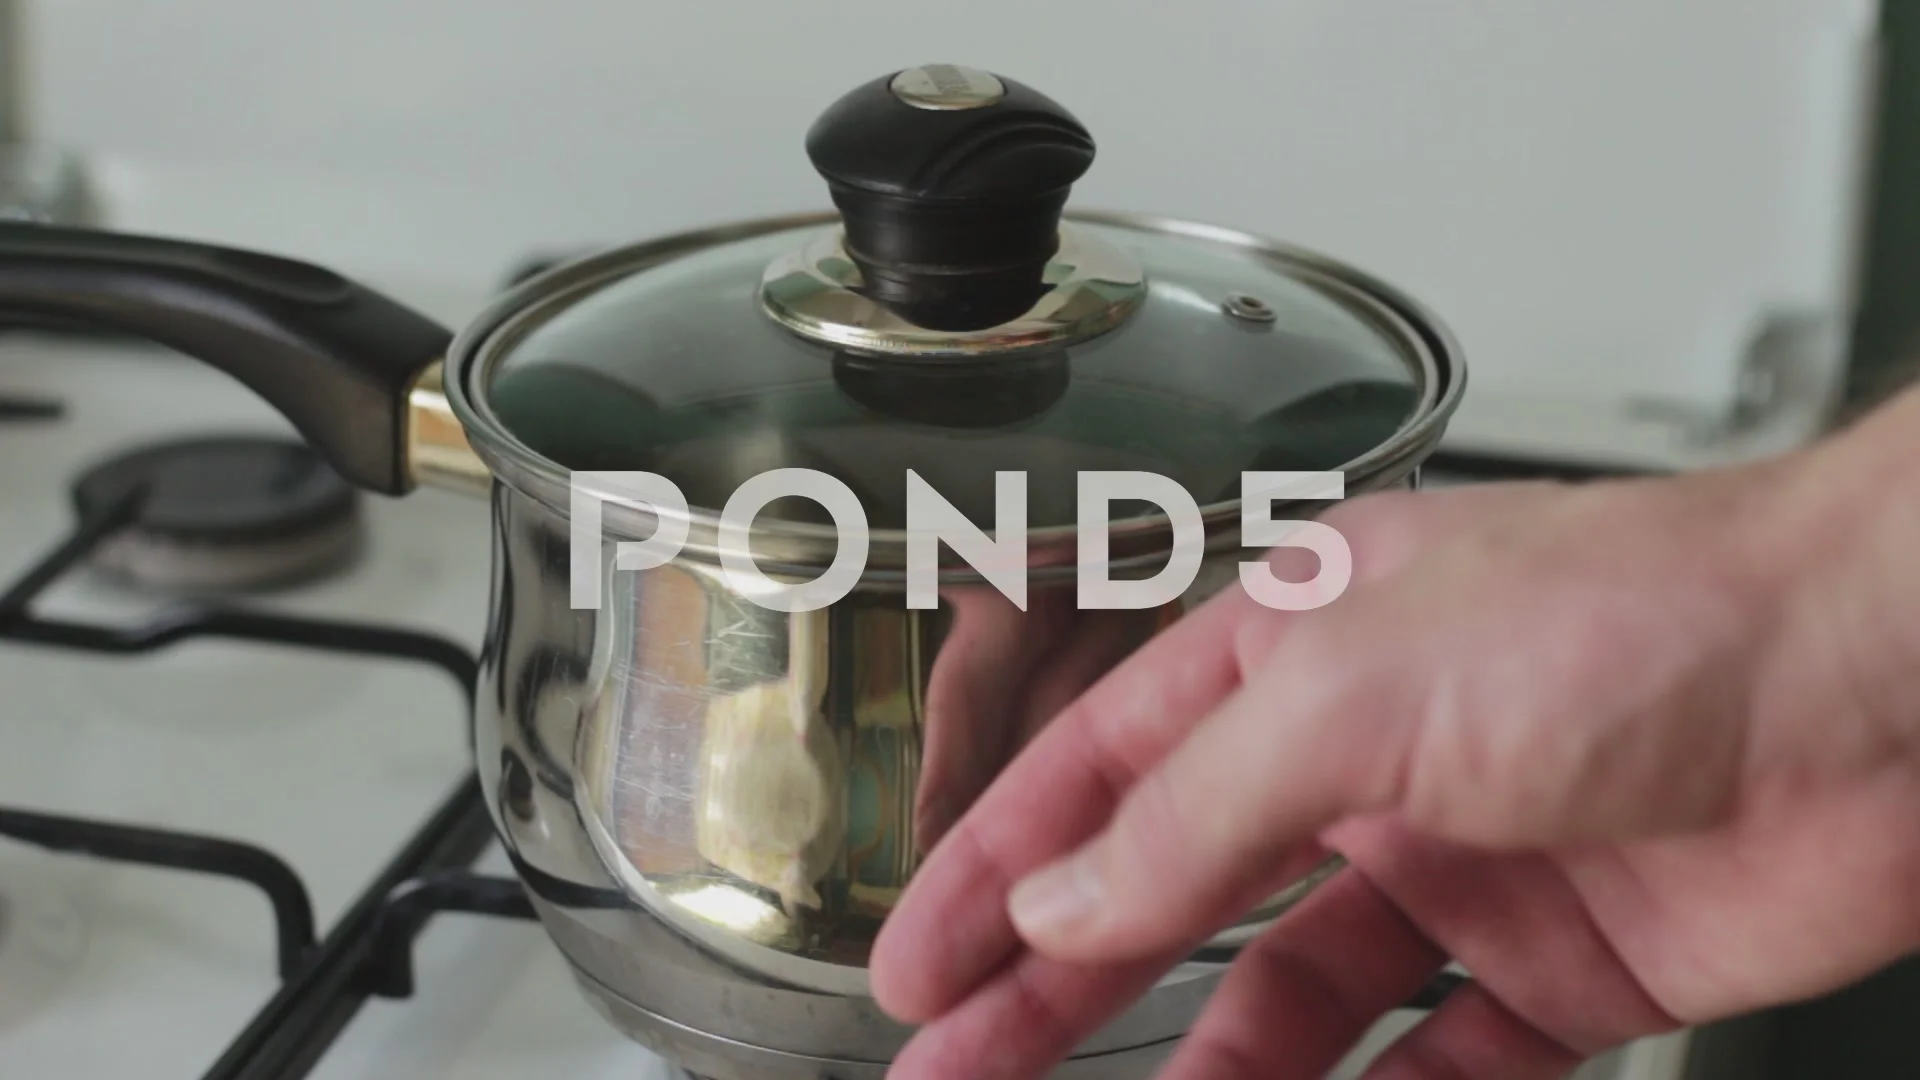 https://images.pond5.com/touching-hot-pan-and-burning-066754111_prevstill.jpeg